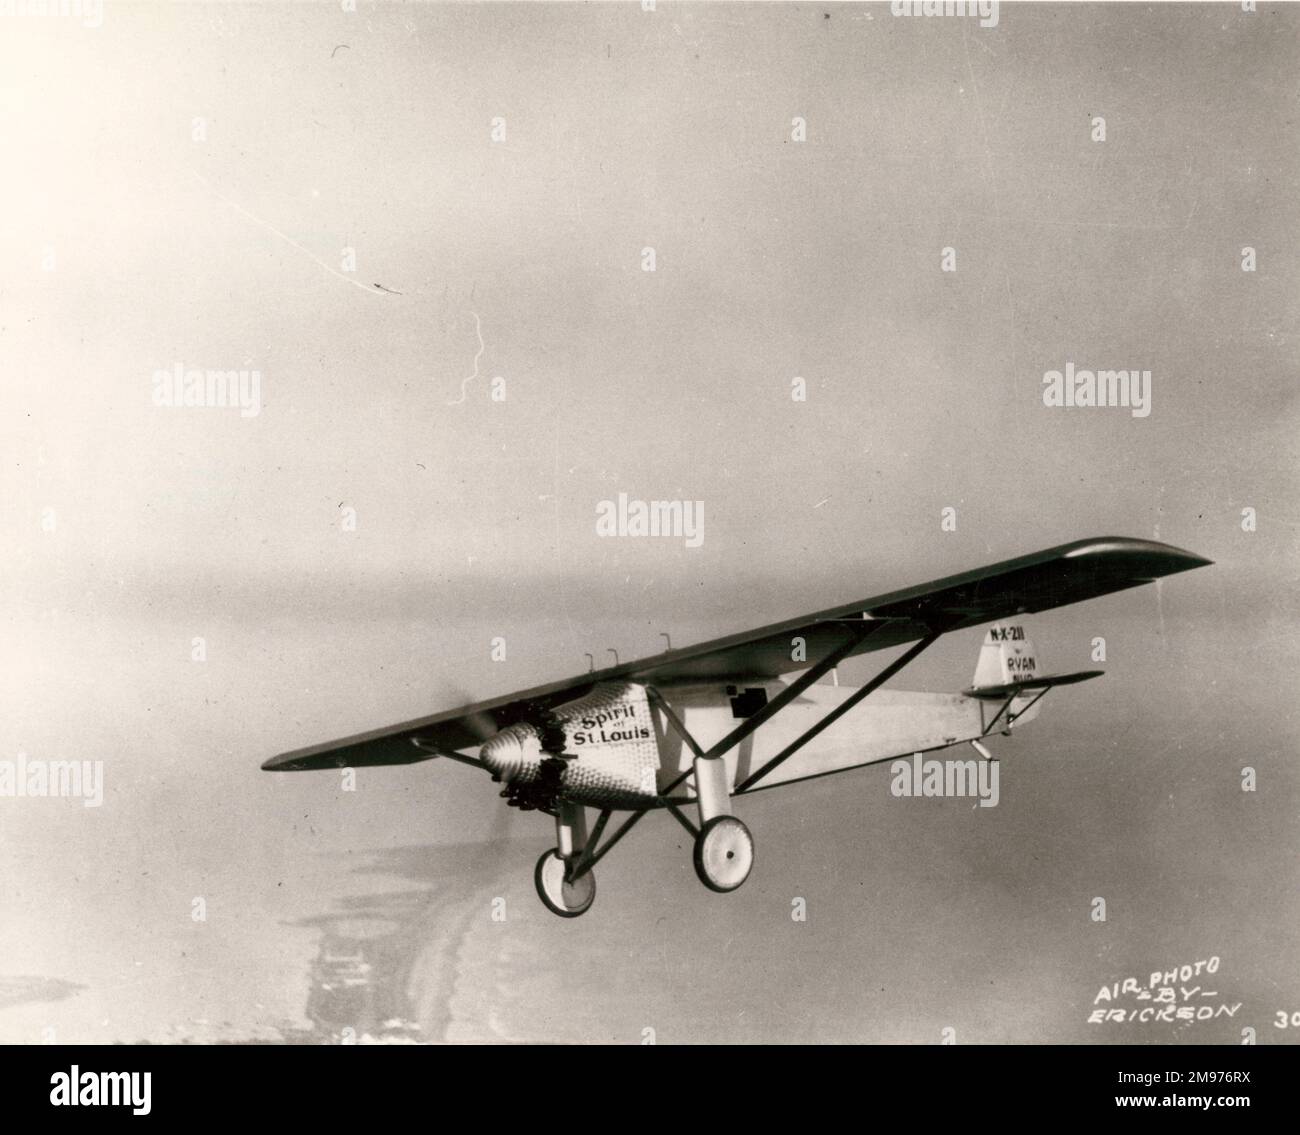 SPIRIT OF ST LOUIS - Ryan NYP. Flown by Charles Lindbergh on the first  nonstop trans-Atlantic flight in May 1927 Stock Photo - Alamy